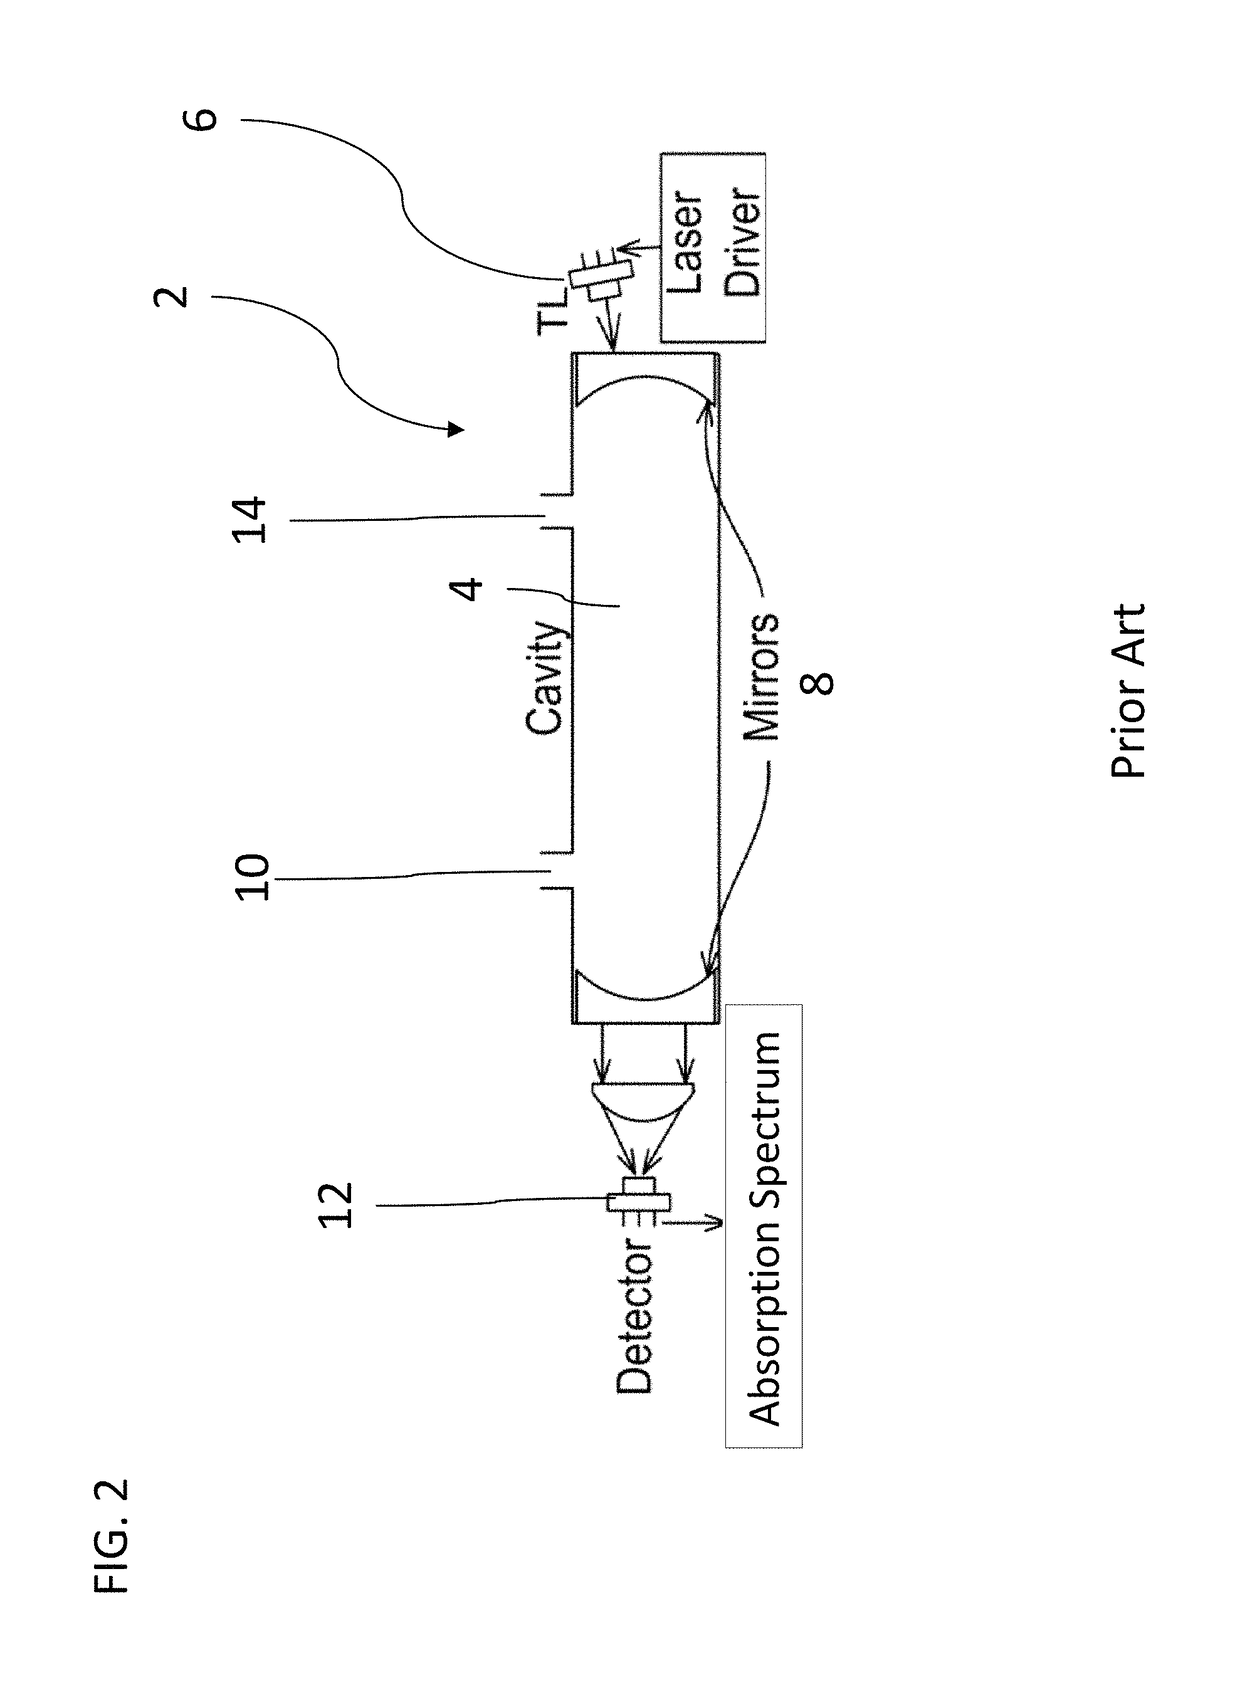 Method and Apparatus for the Spectroscopic Detection of Low Concentrations of Hydrogen Sulfide Gas